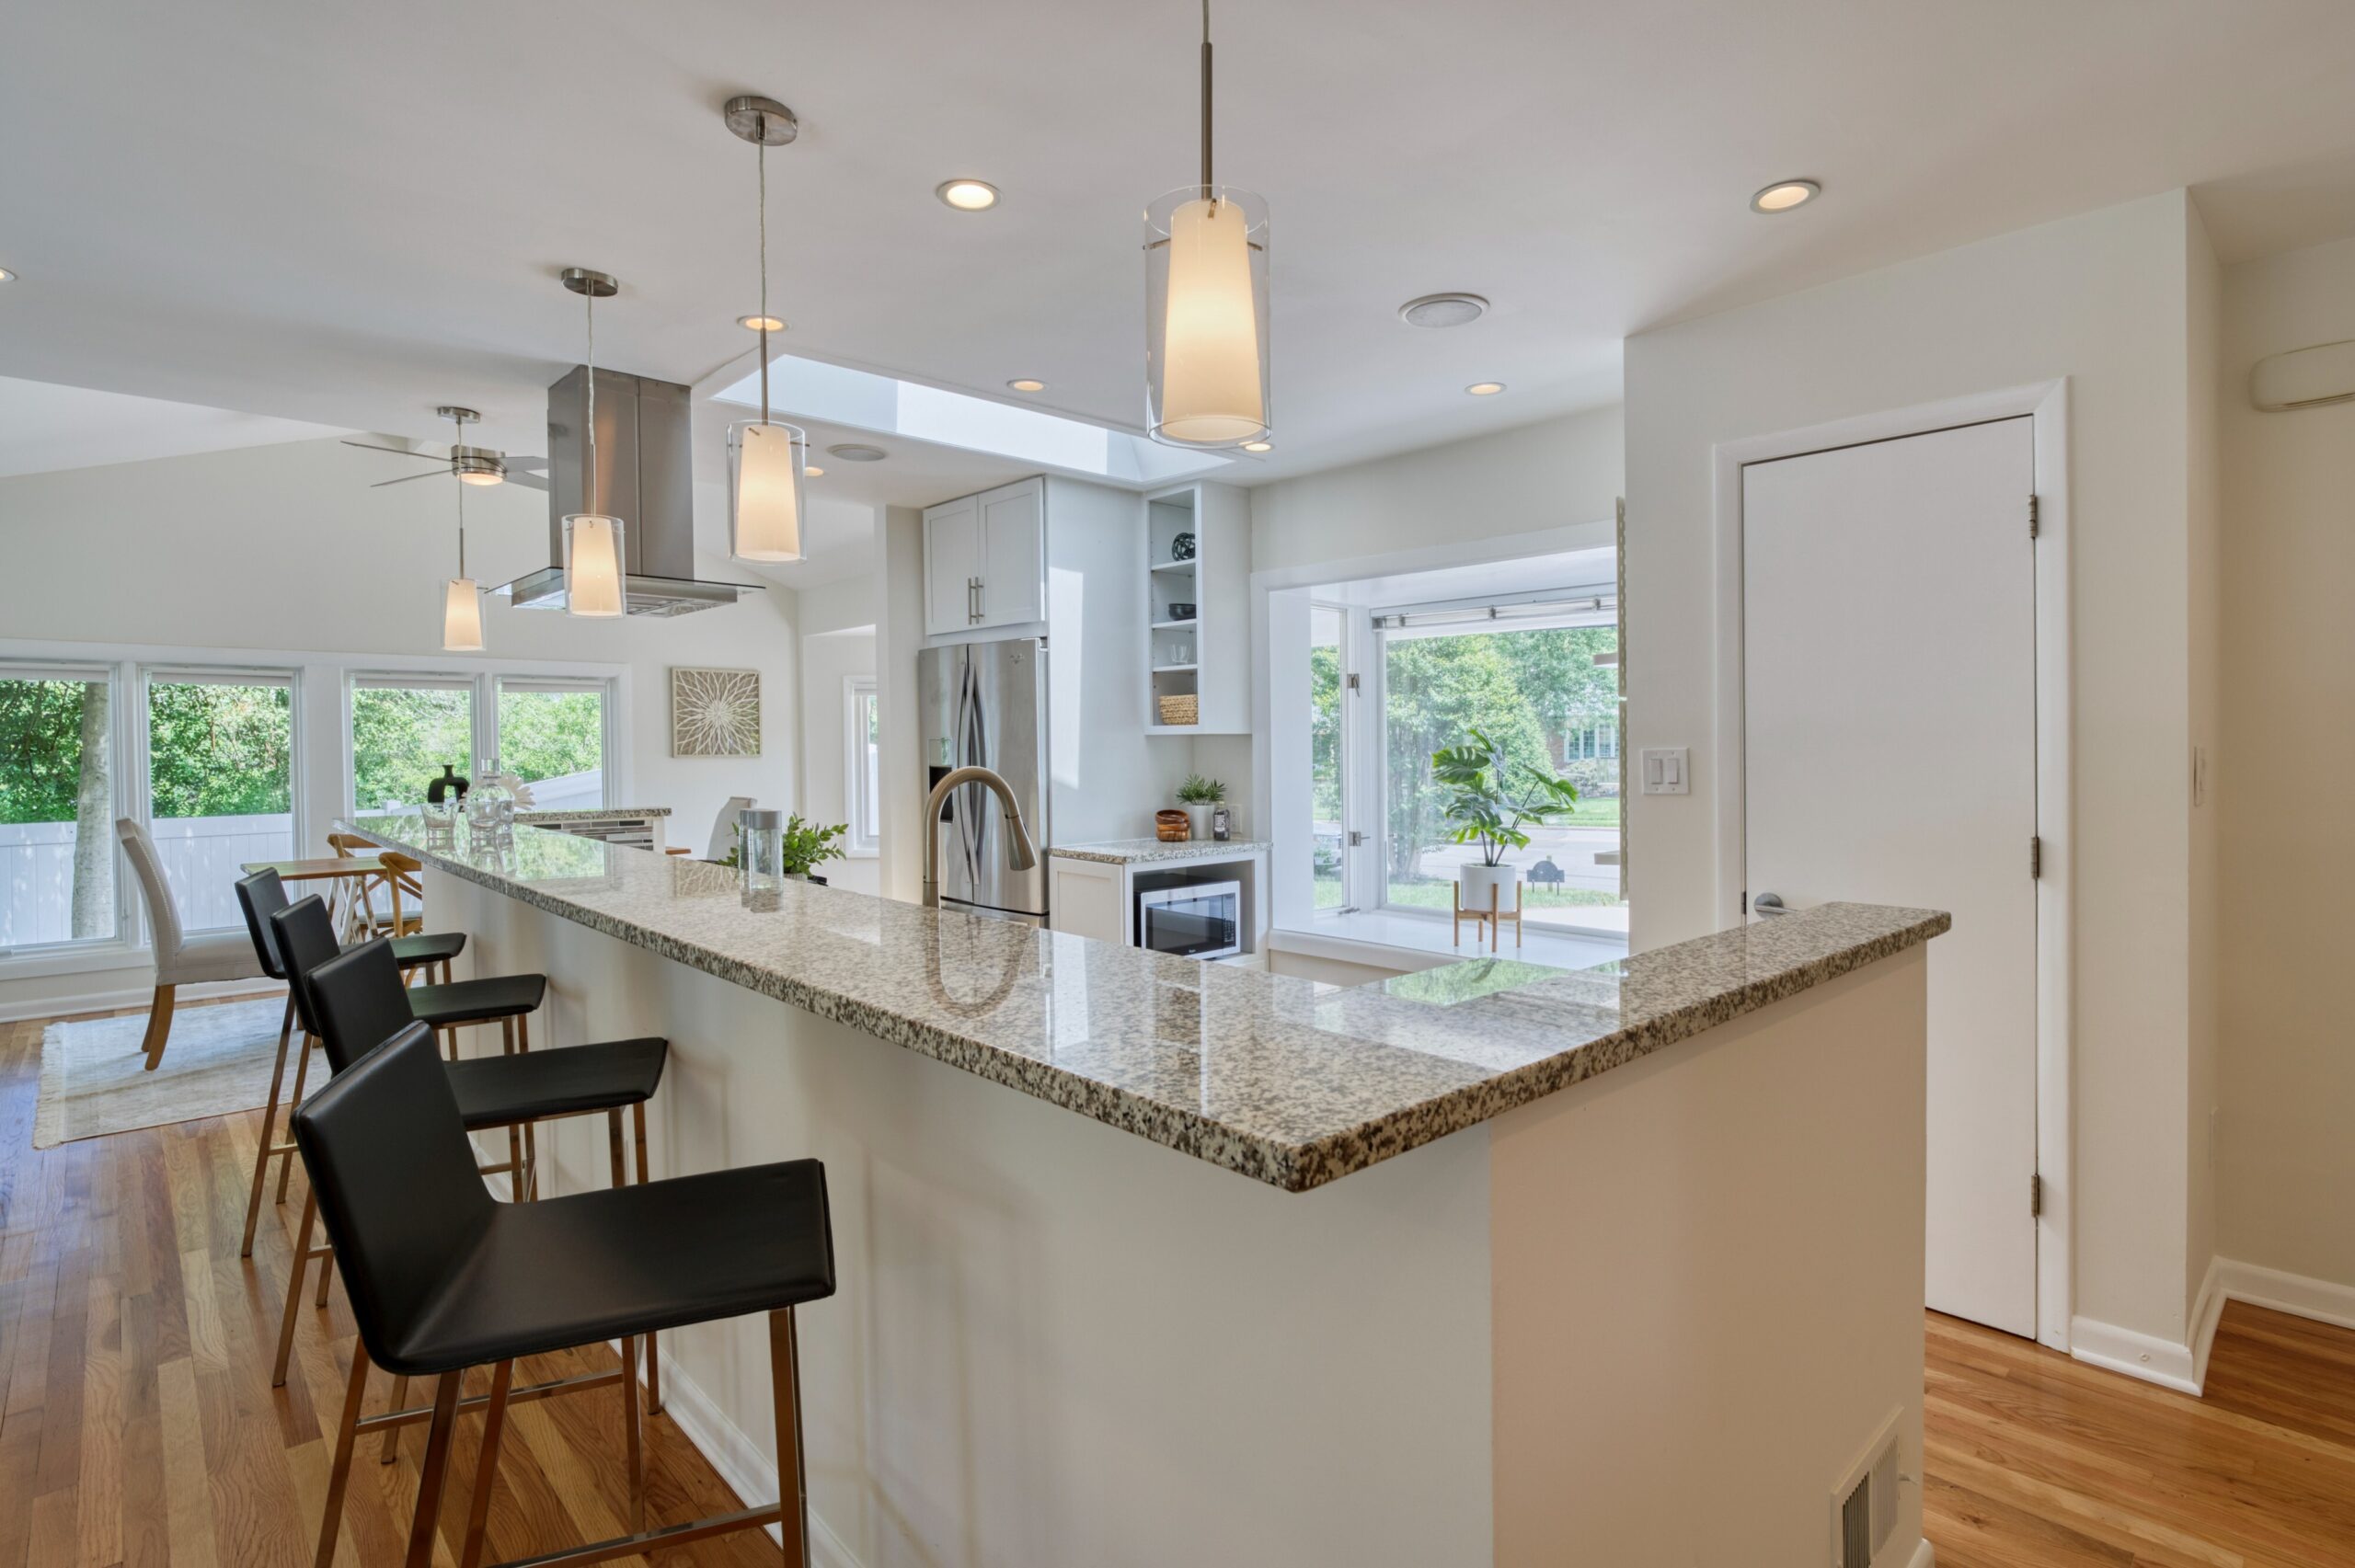 Professional interior photo of 8320 Fort Hunt Rd, Alexandria - showing the open kitchen with skylight, huge two-tier island with range and stainless hood